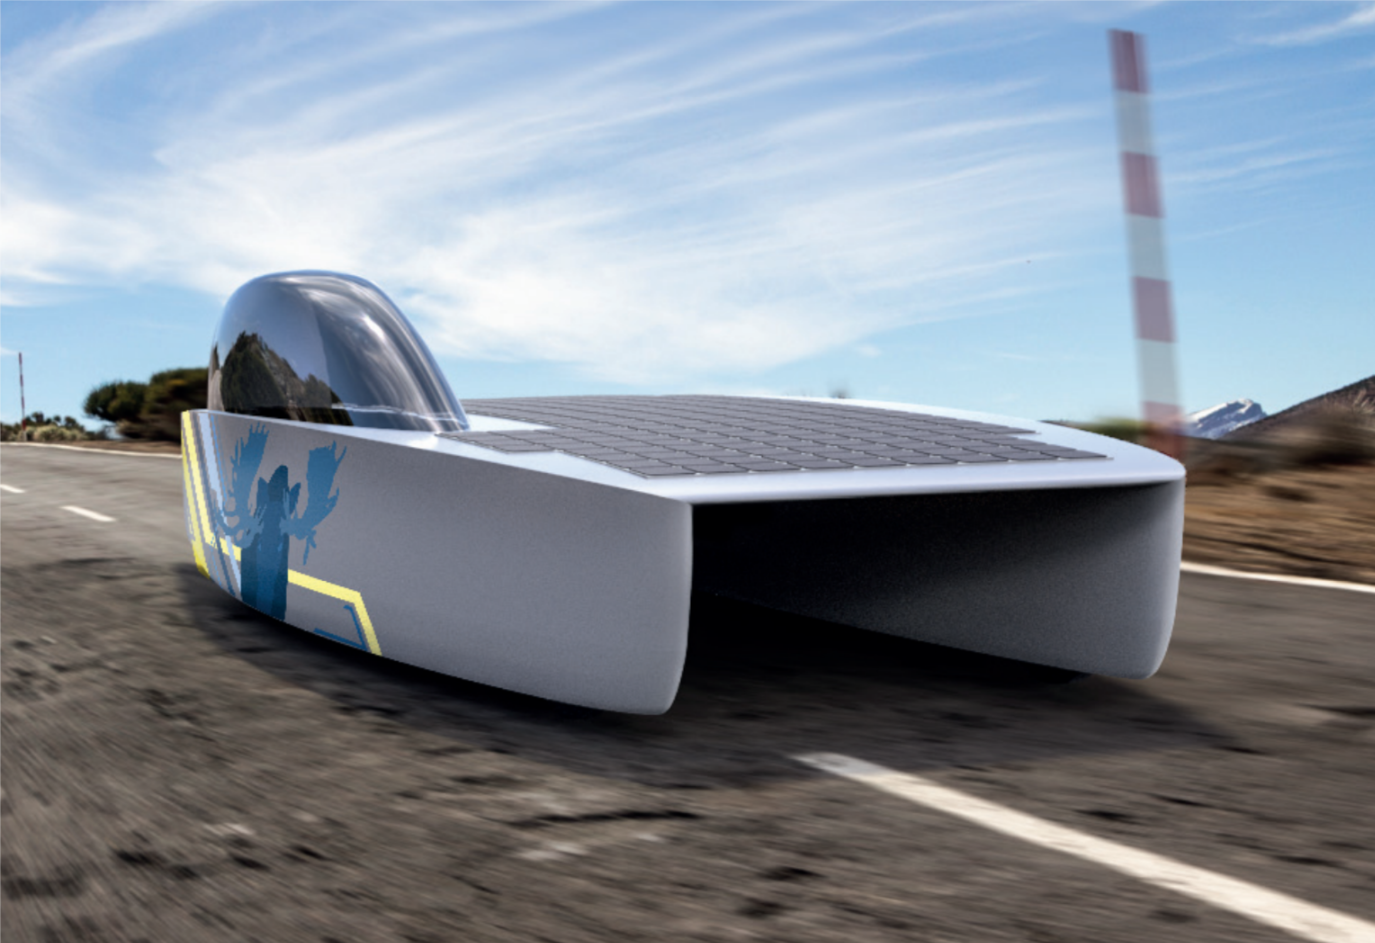 Concept of the solarcar Solveig